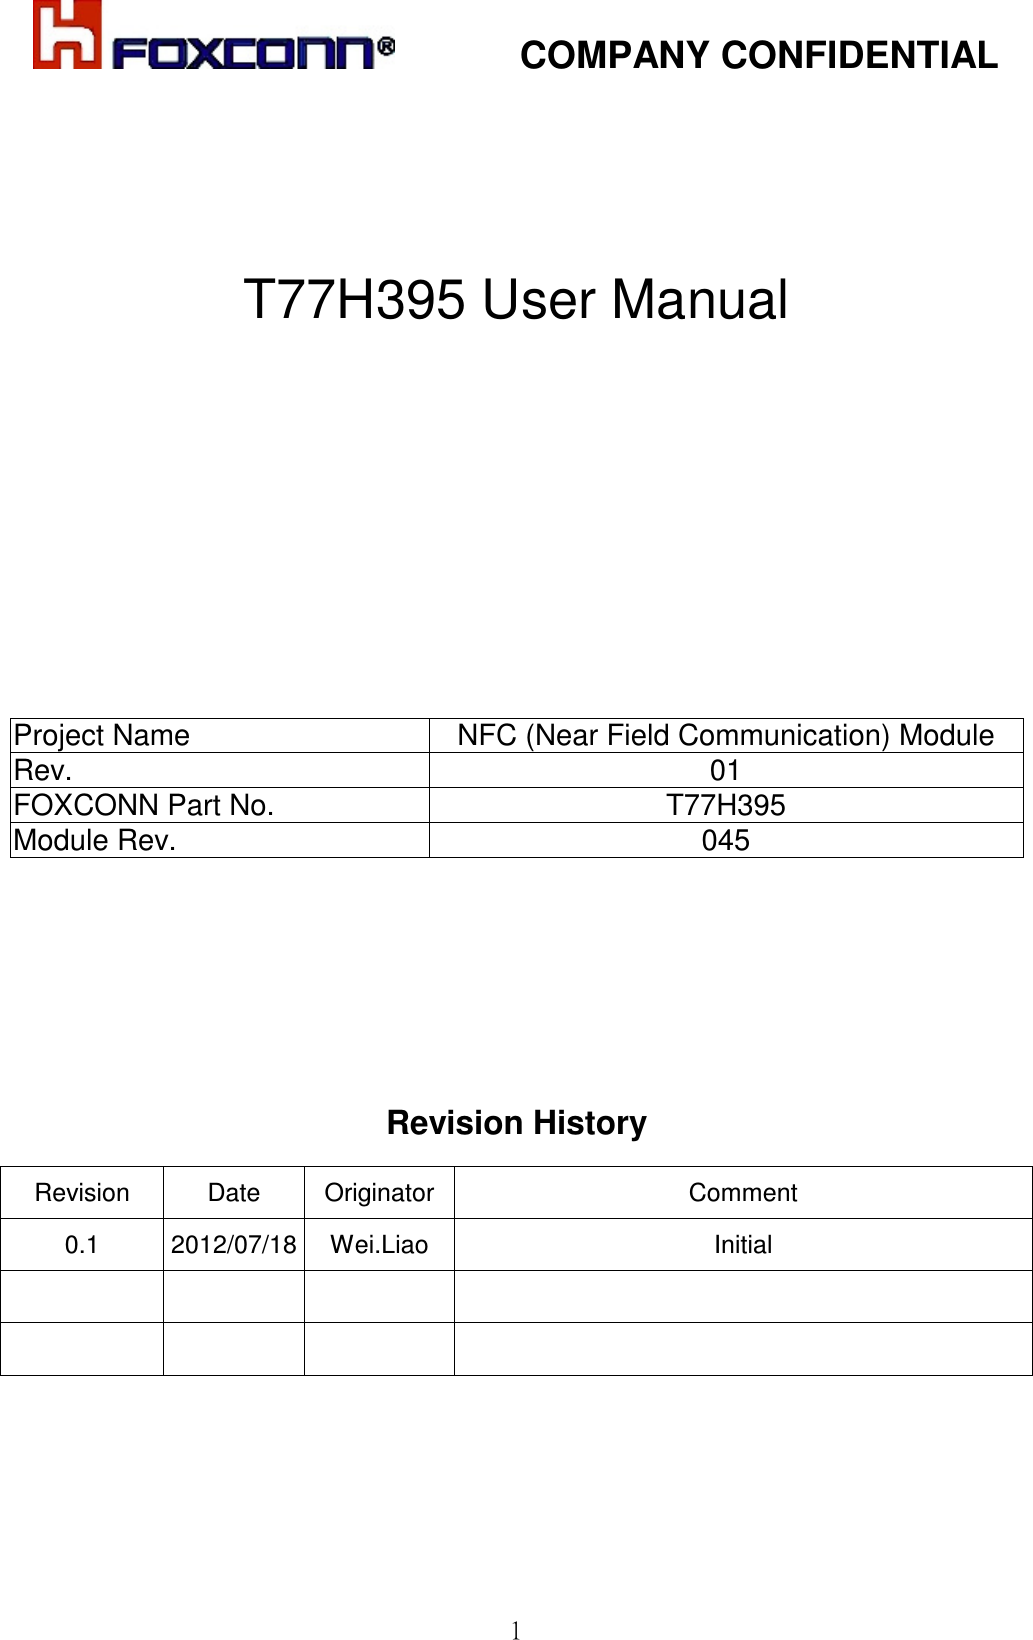            COMPANY CONFIDENTIAL  1     T77H395 User Manual           Project Name NFC (Near Field Communication) Module  Rev. 01 FOXCONN Part No. T77H395 Module Rev.  045       Revision History         Revision   Date  Originator  Comment 0.1  2012/07/18 Wei.Liao  Initial               